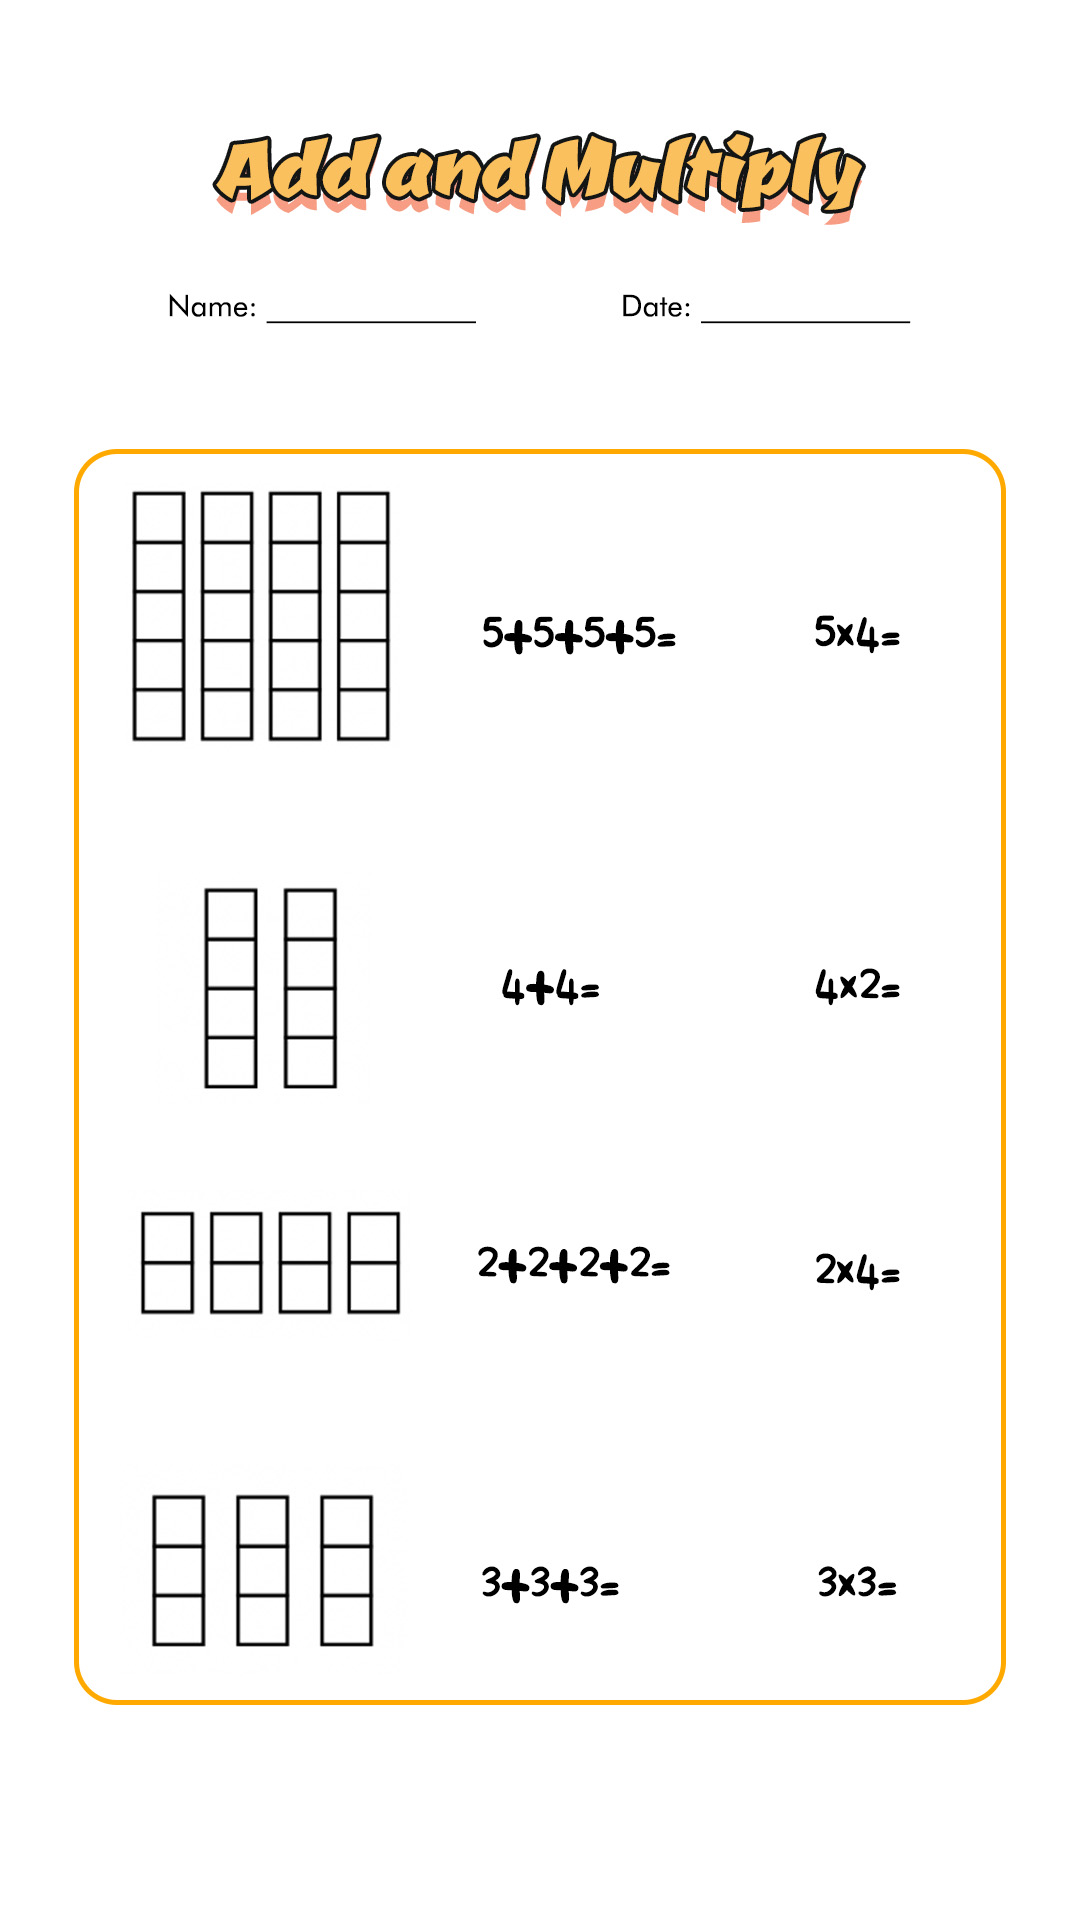 Multiplication Repeated Addition Arrays Worksheets Image